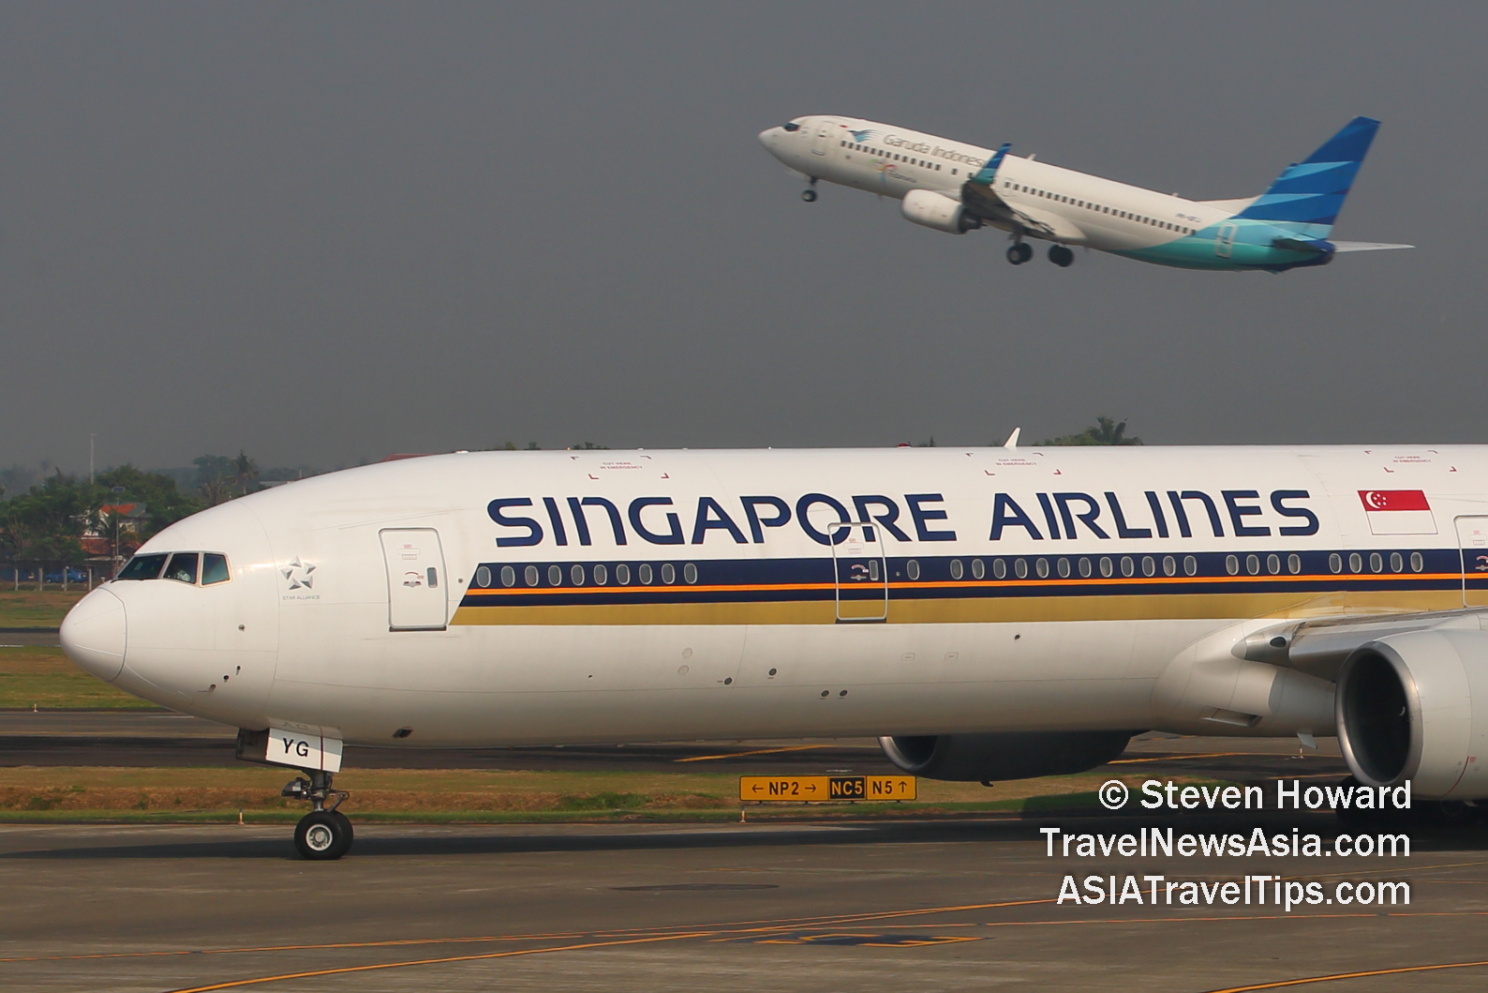 Singapore Airlines Boeing 777 reg: 9V-SYG in the foreground with a Garuda Indonesia aircraft taking off in the background. Picture by Steven Howard of TravelNewsAsia.com Click to enlarge.